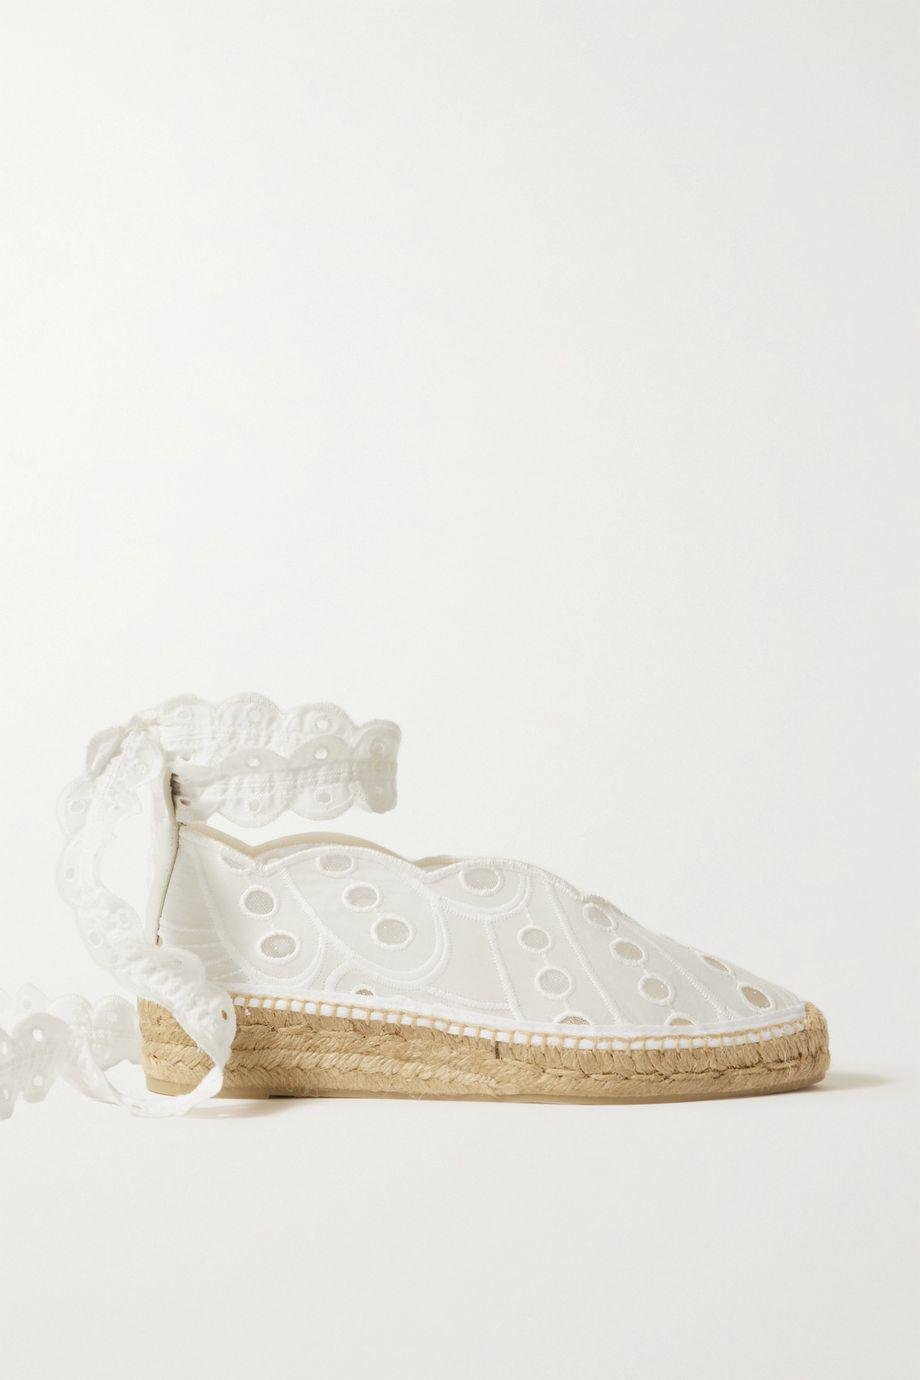 + Charo Ruiz Gea broderie anglaise cotton espadrilles by CASTANER